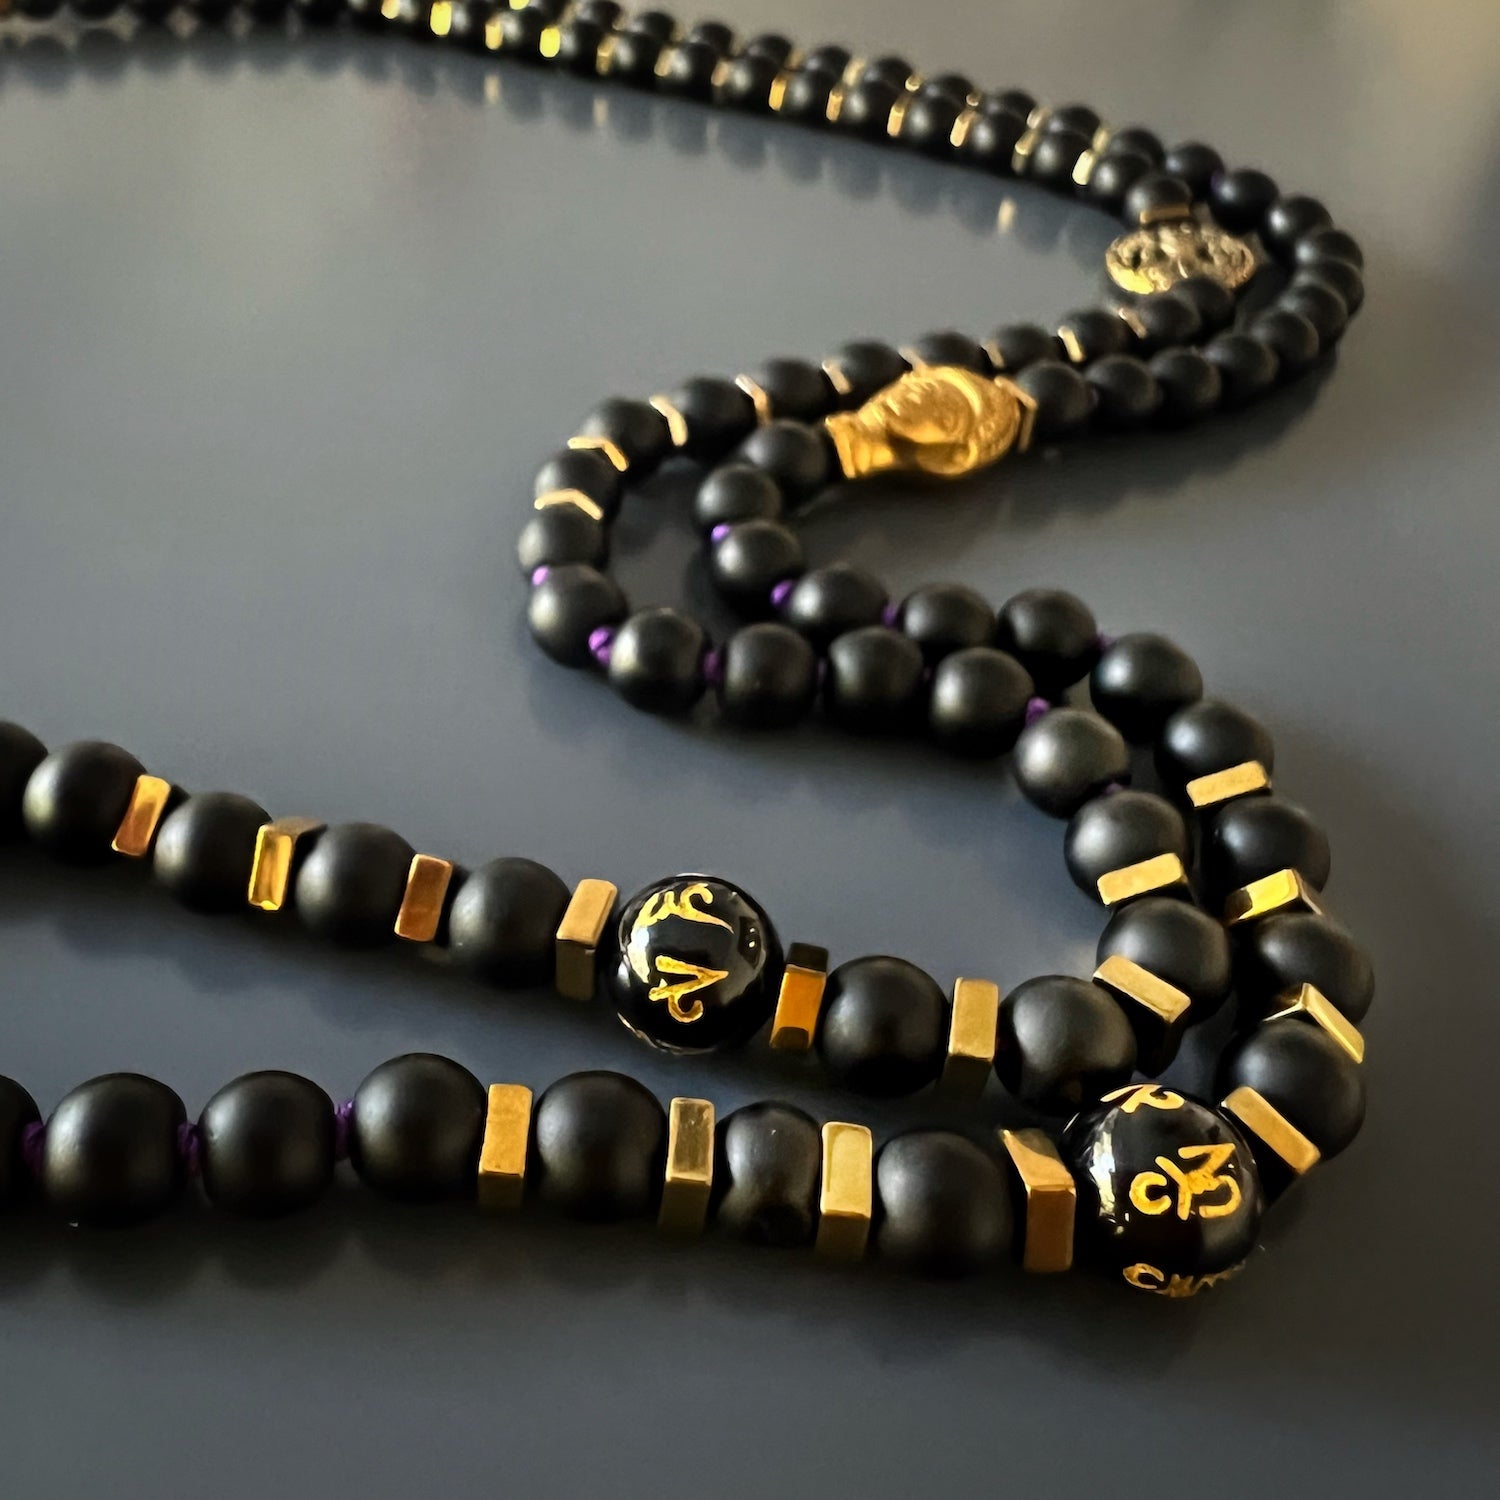 The powerful Om pendant, symbolizing the interconnectedness of all things, in the necklace